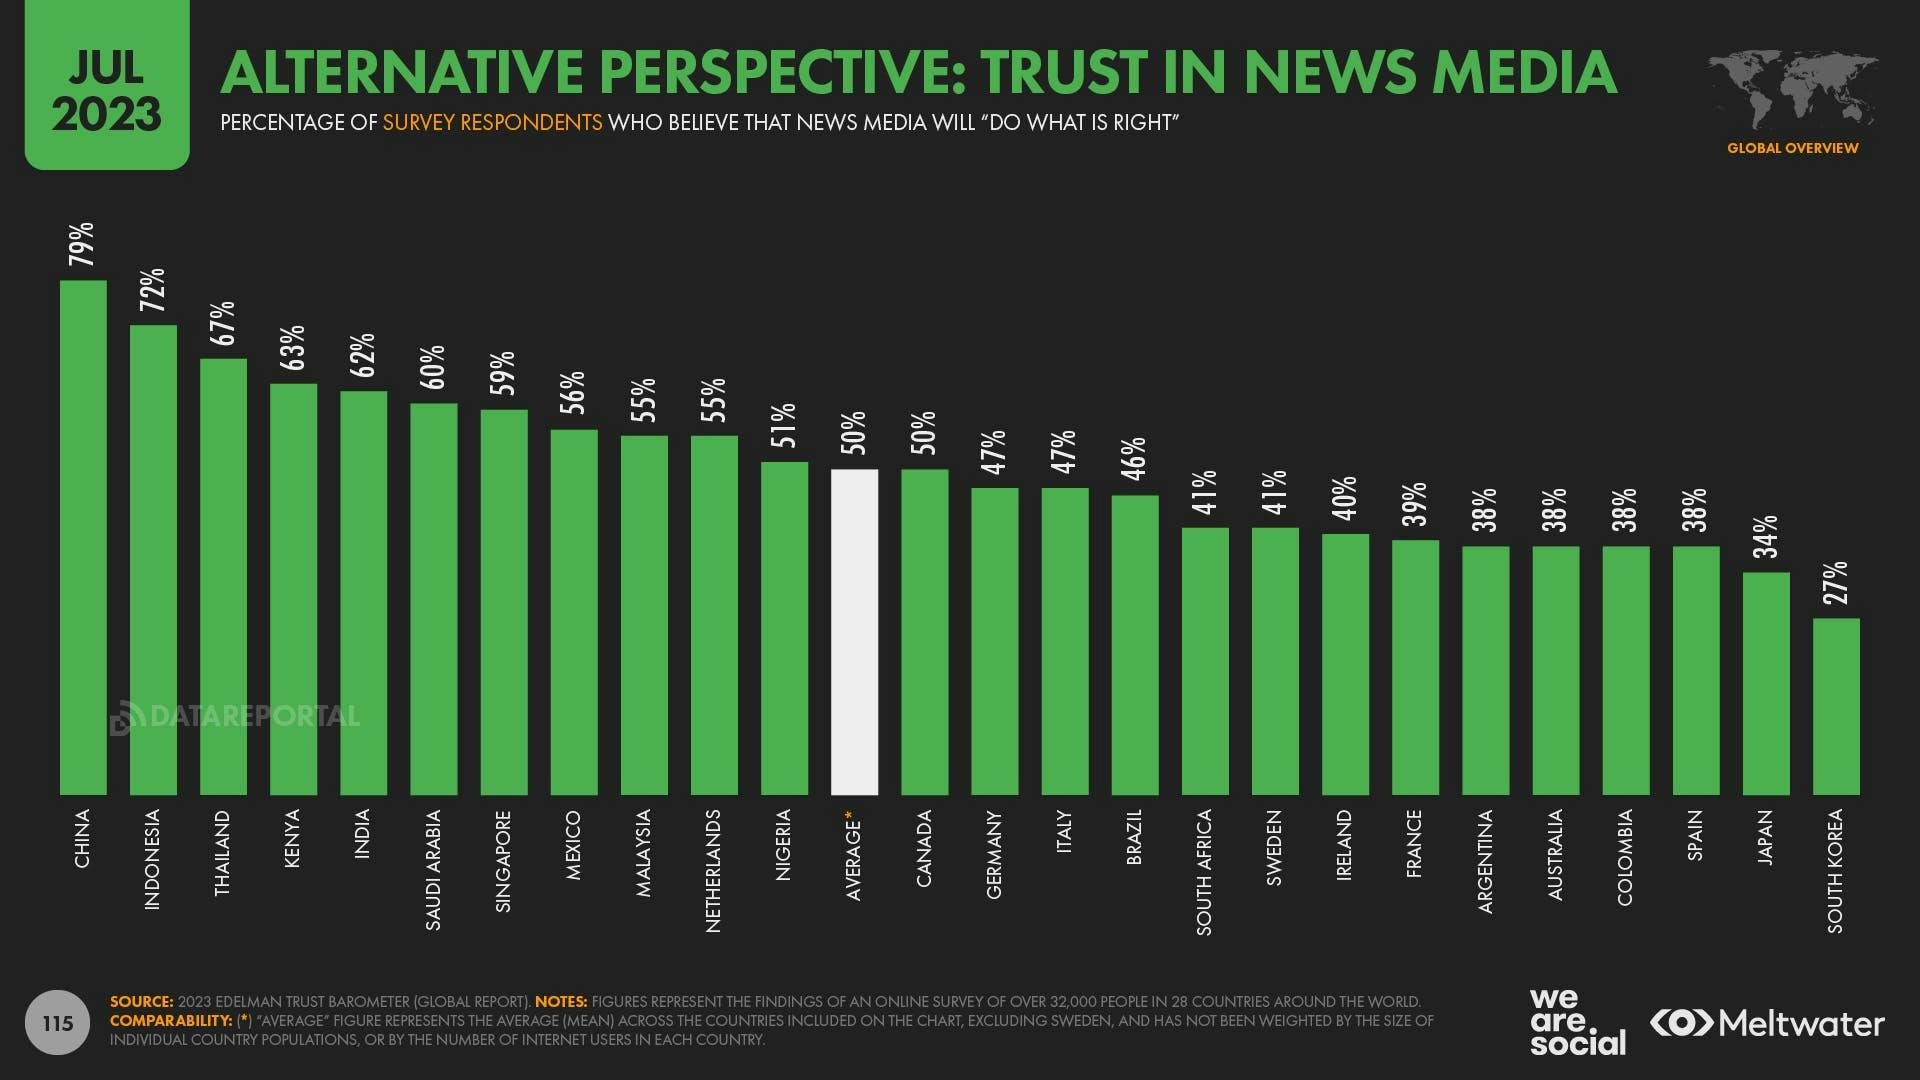 A bar chart showing percentage of people across nations who believe that news media will "do what is right", with a global average of 50%, according to Edelman Trust Barometer survey data.